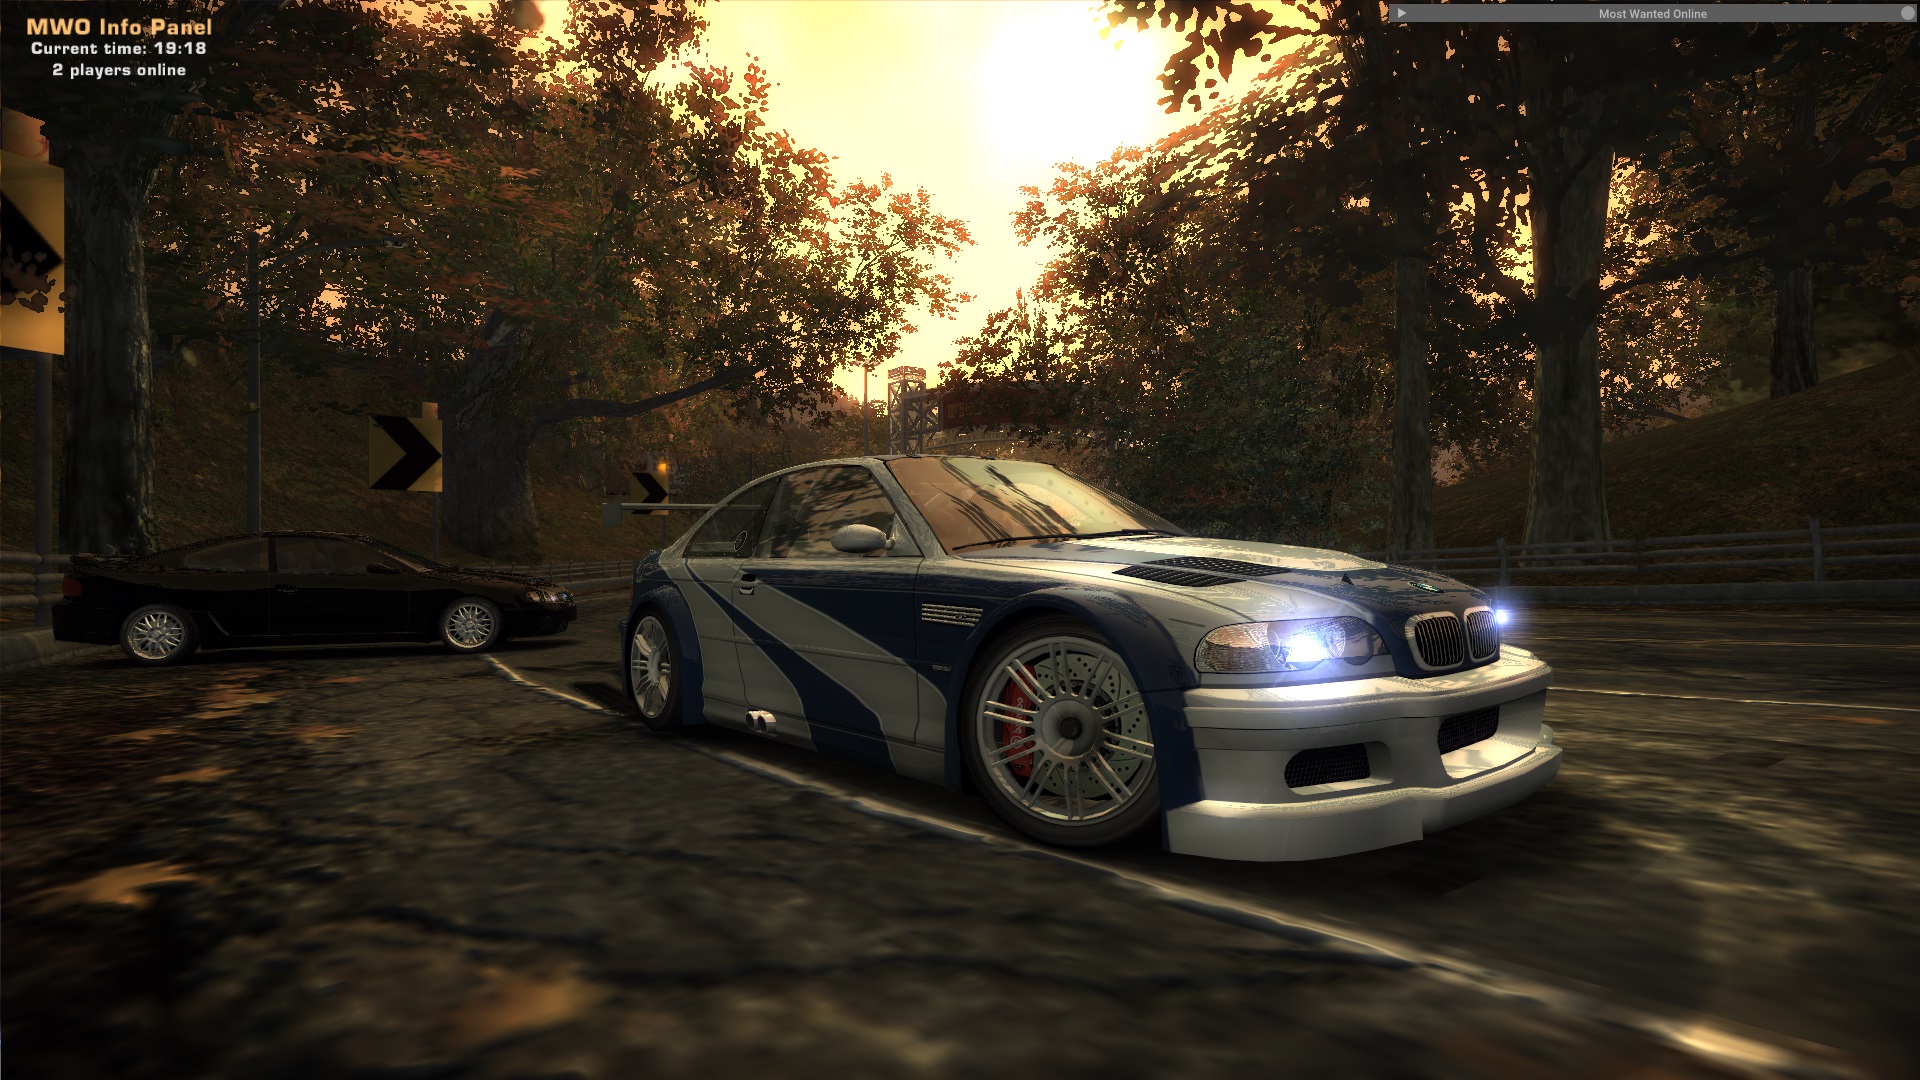 Музыка из игры most wanted. NFS 2005 BMW. NFS most wanted 2005. BMW m3 GTR. Нфс мост вантед 2005.